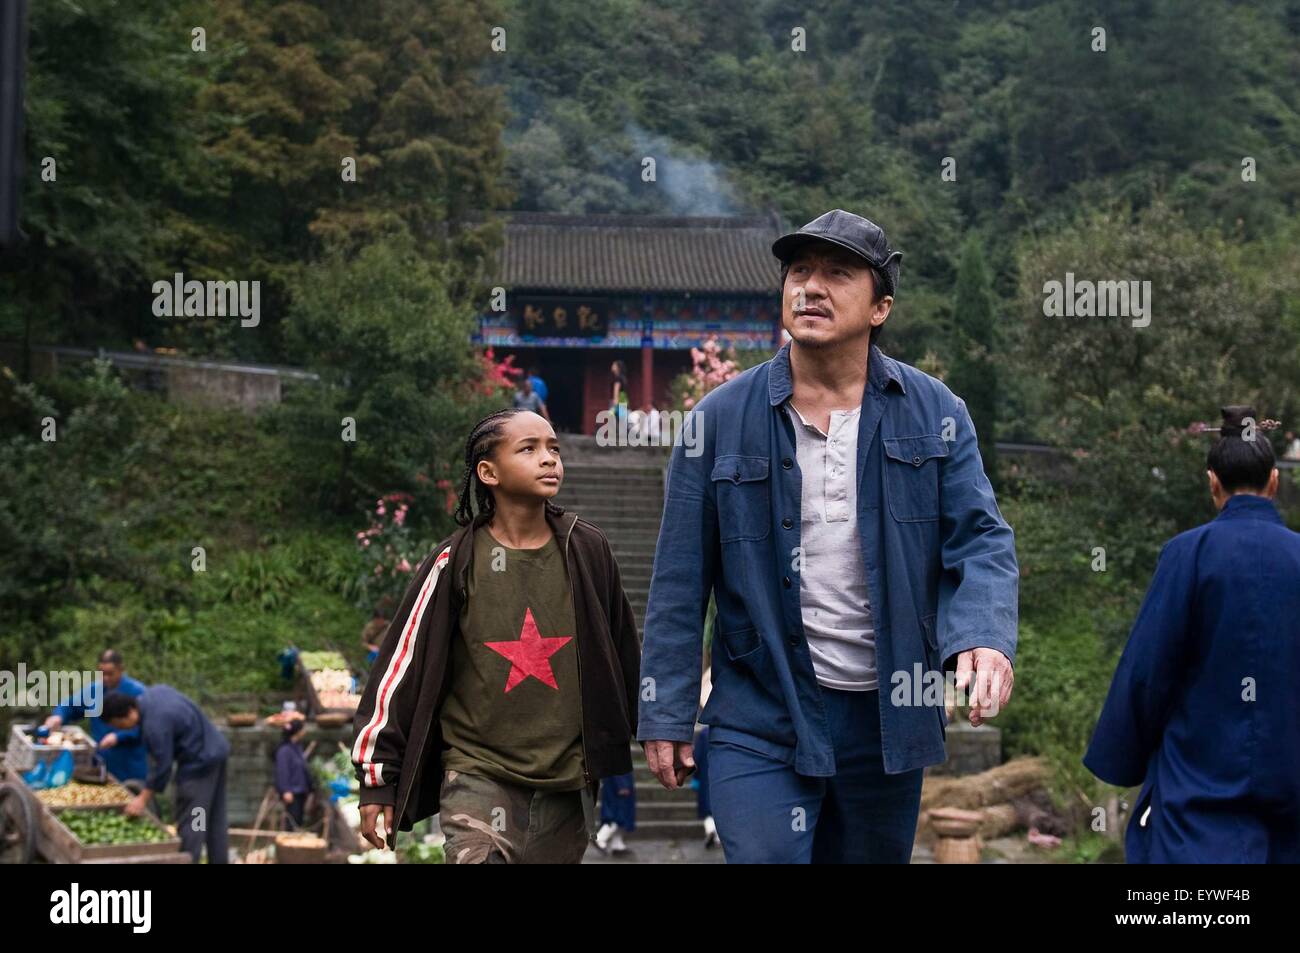 The Karate Kid ; Year : 2010 USA / China ; Director : Harald Zwart ; Jaden Smith, Jackie Chan ; Jasin Boland - 2009 Columbia TriStar Marketing Group, Inc., All Rights Reserved. Stock Photo